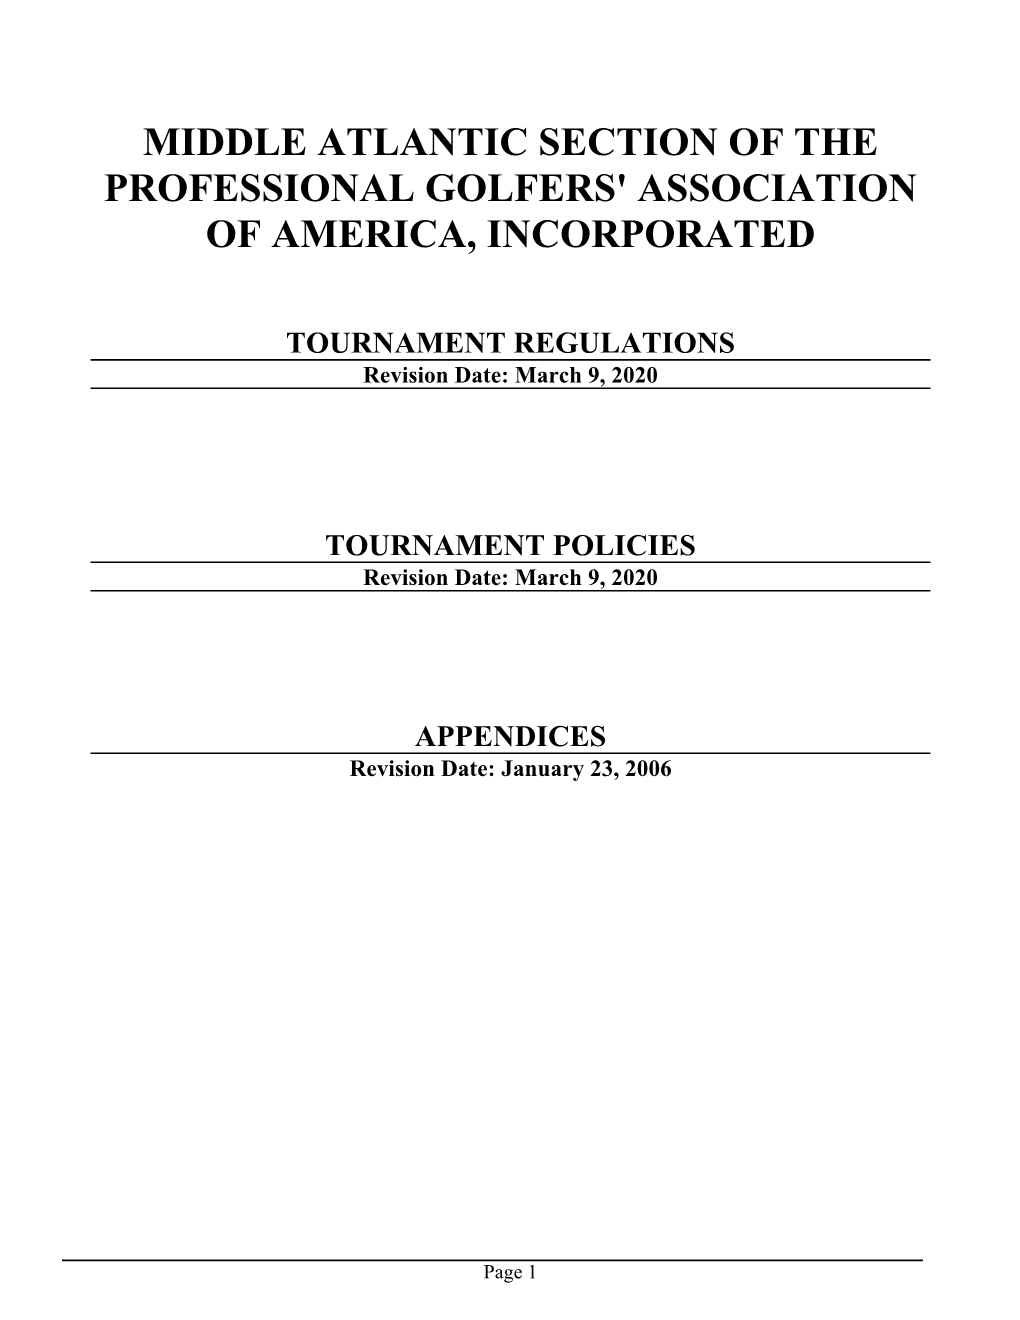 Middle Atlantic Section of the Professional Golfers' Association of America, Incorporated